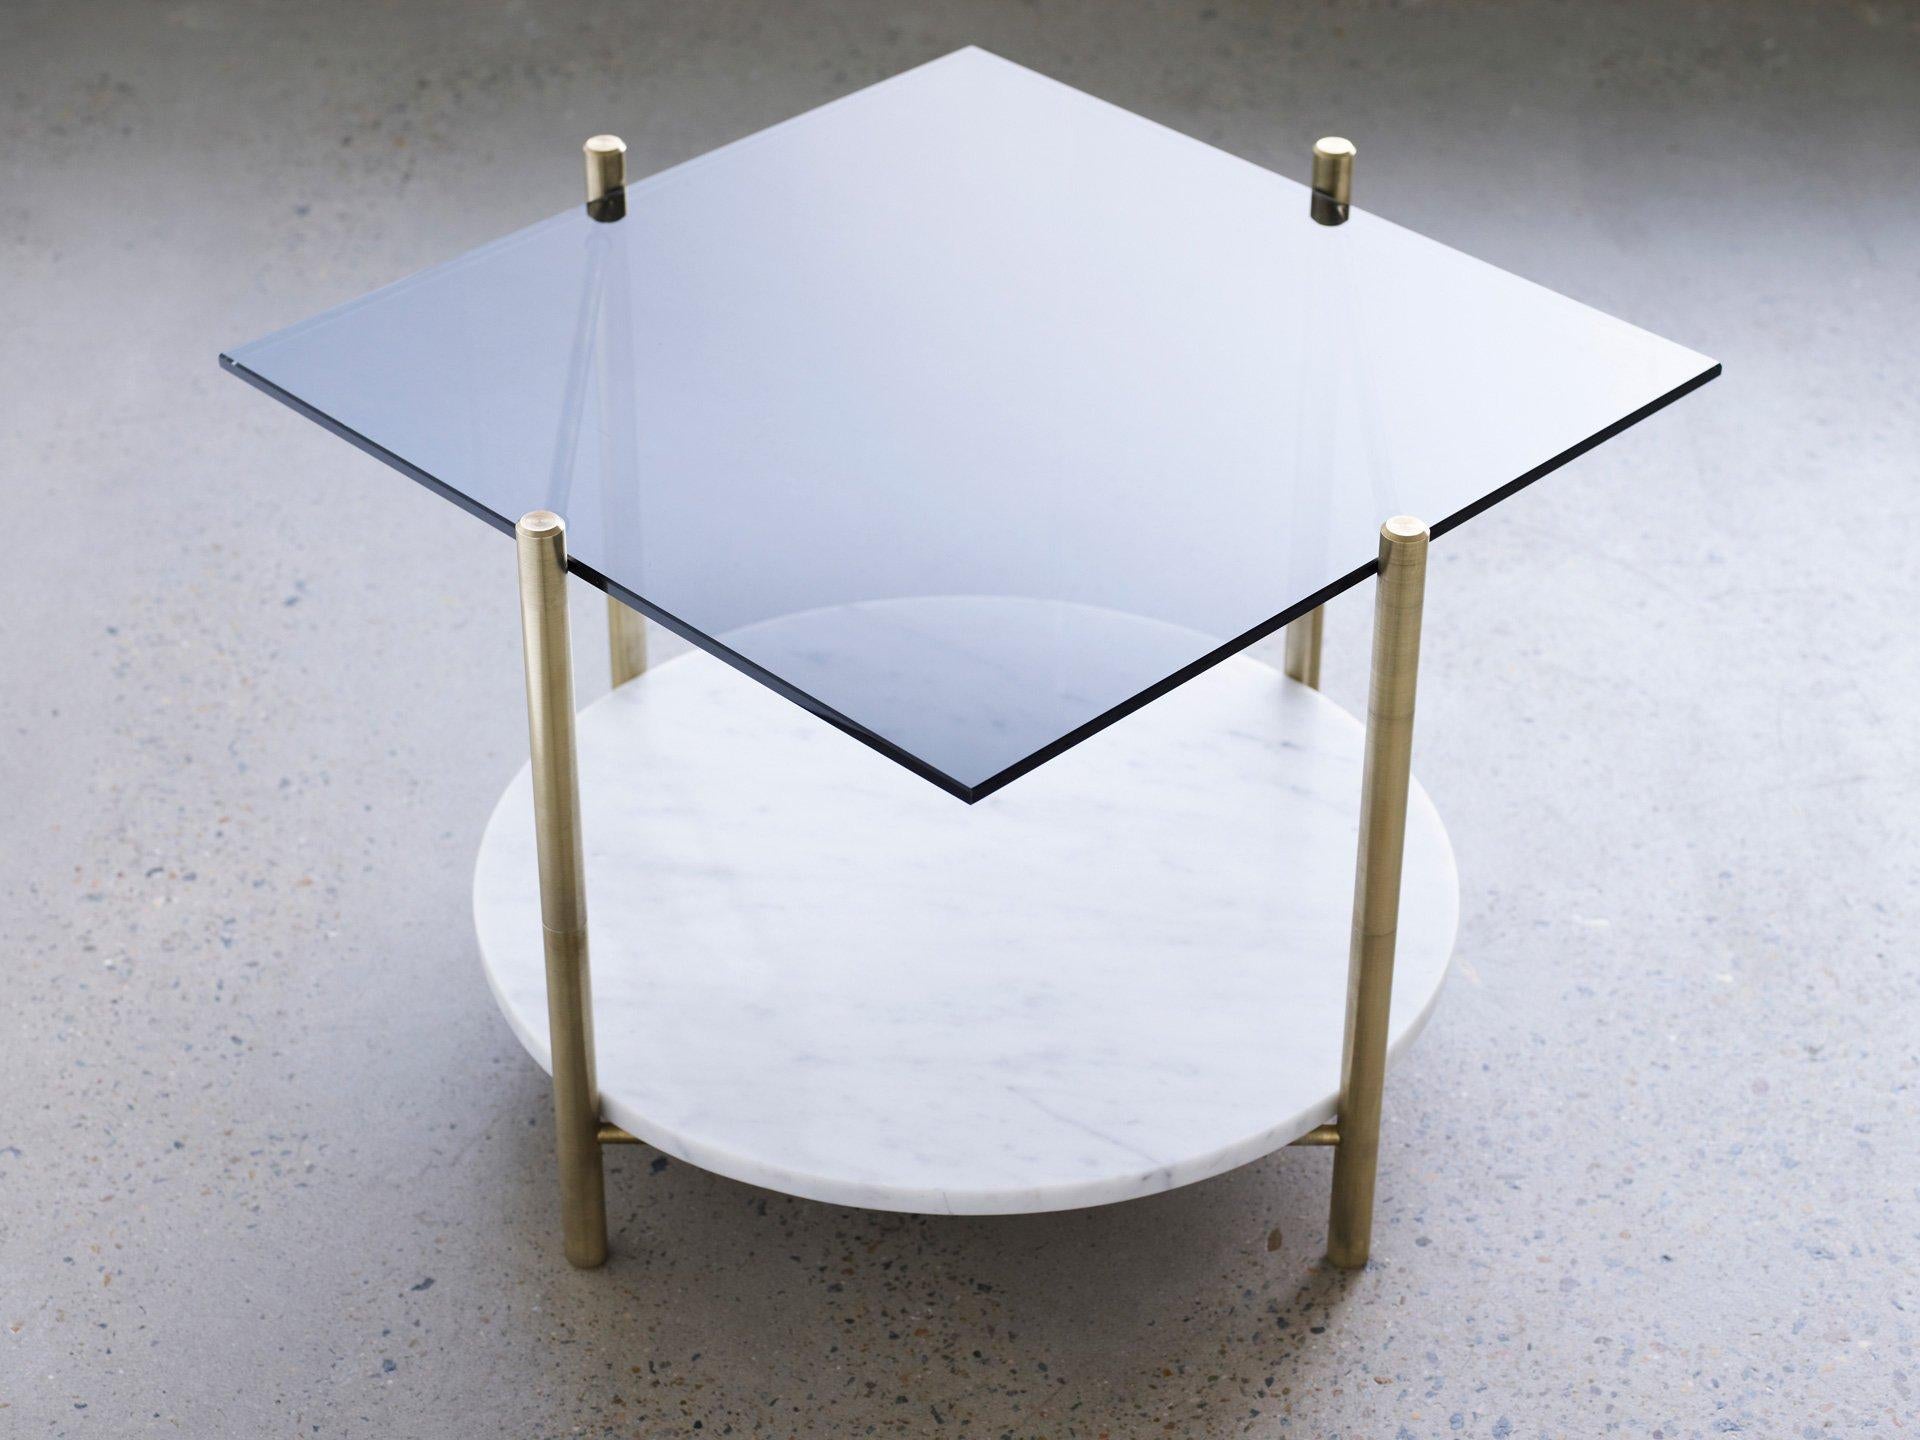 Coffee table by Henry Wilson
Square table/round table

Solid brass frame with two tiered surfaces. All the tables are made to order in client specified materials. Some possibilities are, stone varieties, timbers, clear glass and colored glass, in